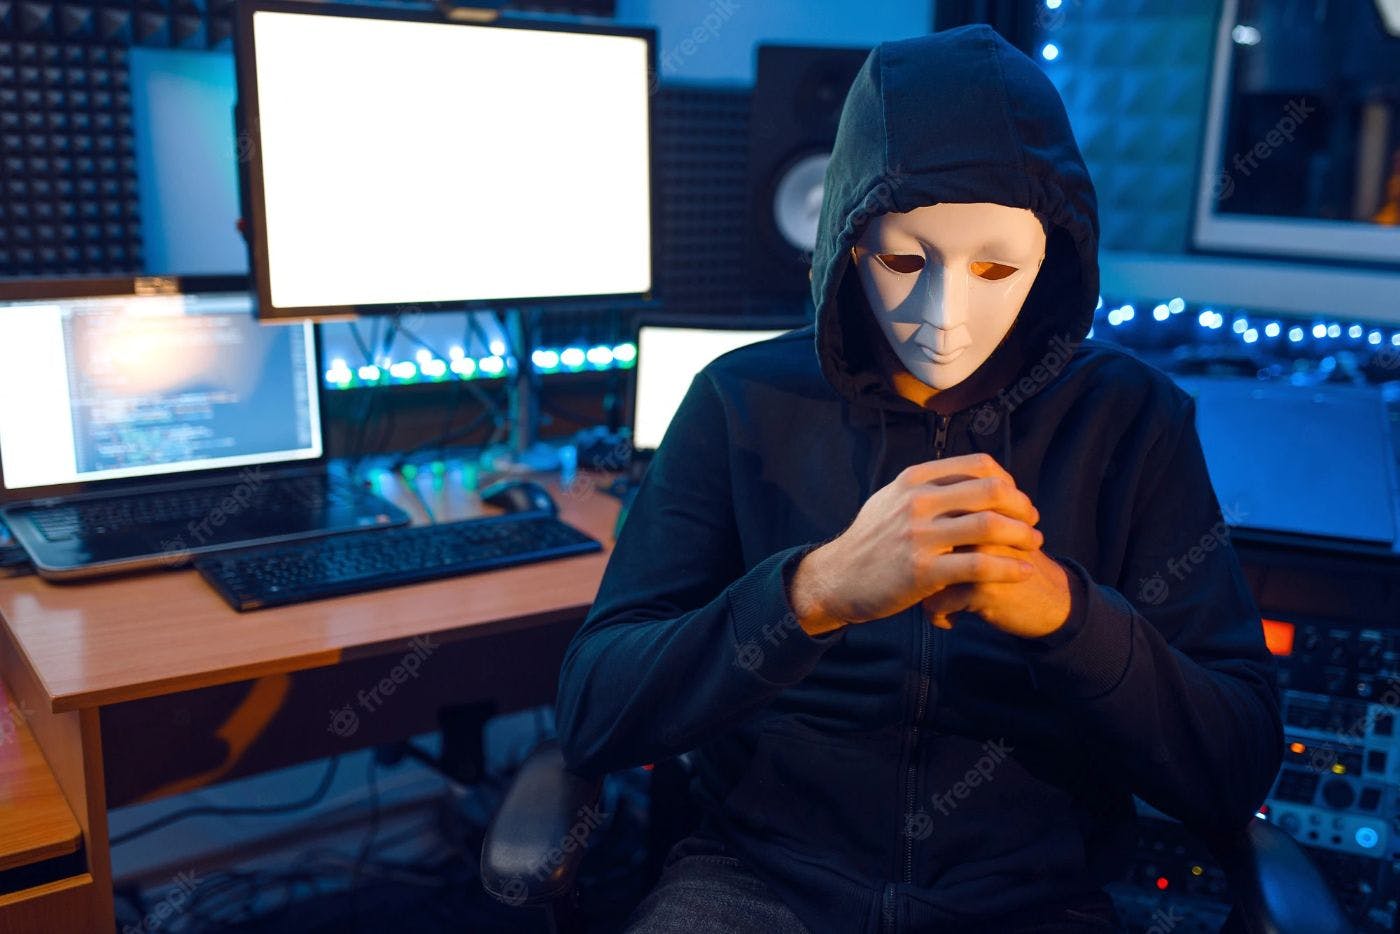 featured image - How To Find Out If A Hacker Has Attacked You